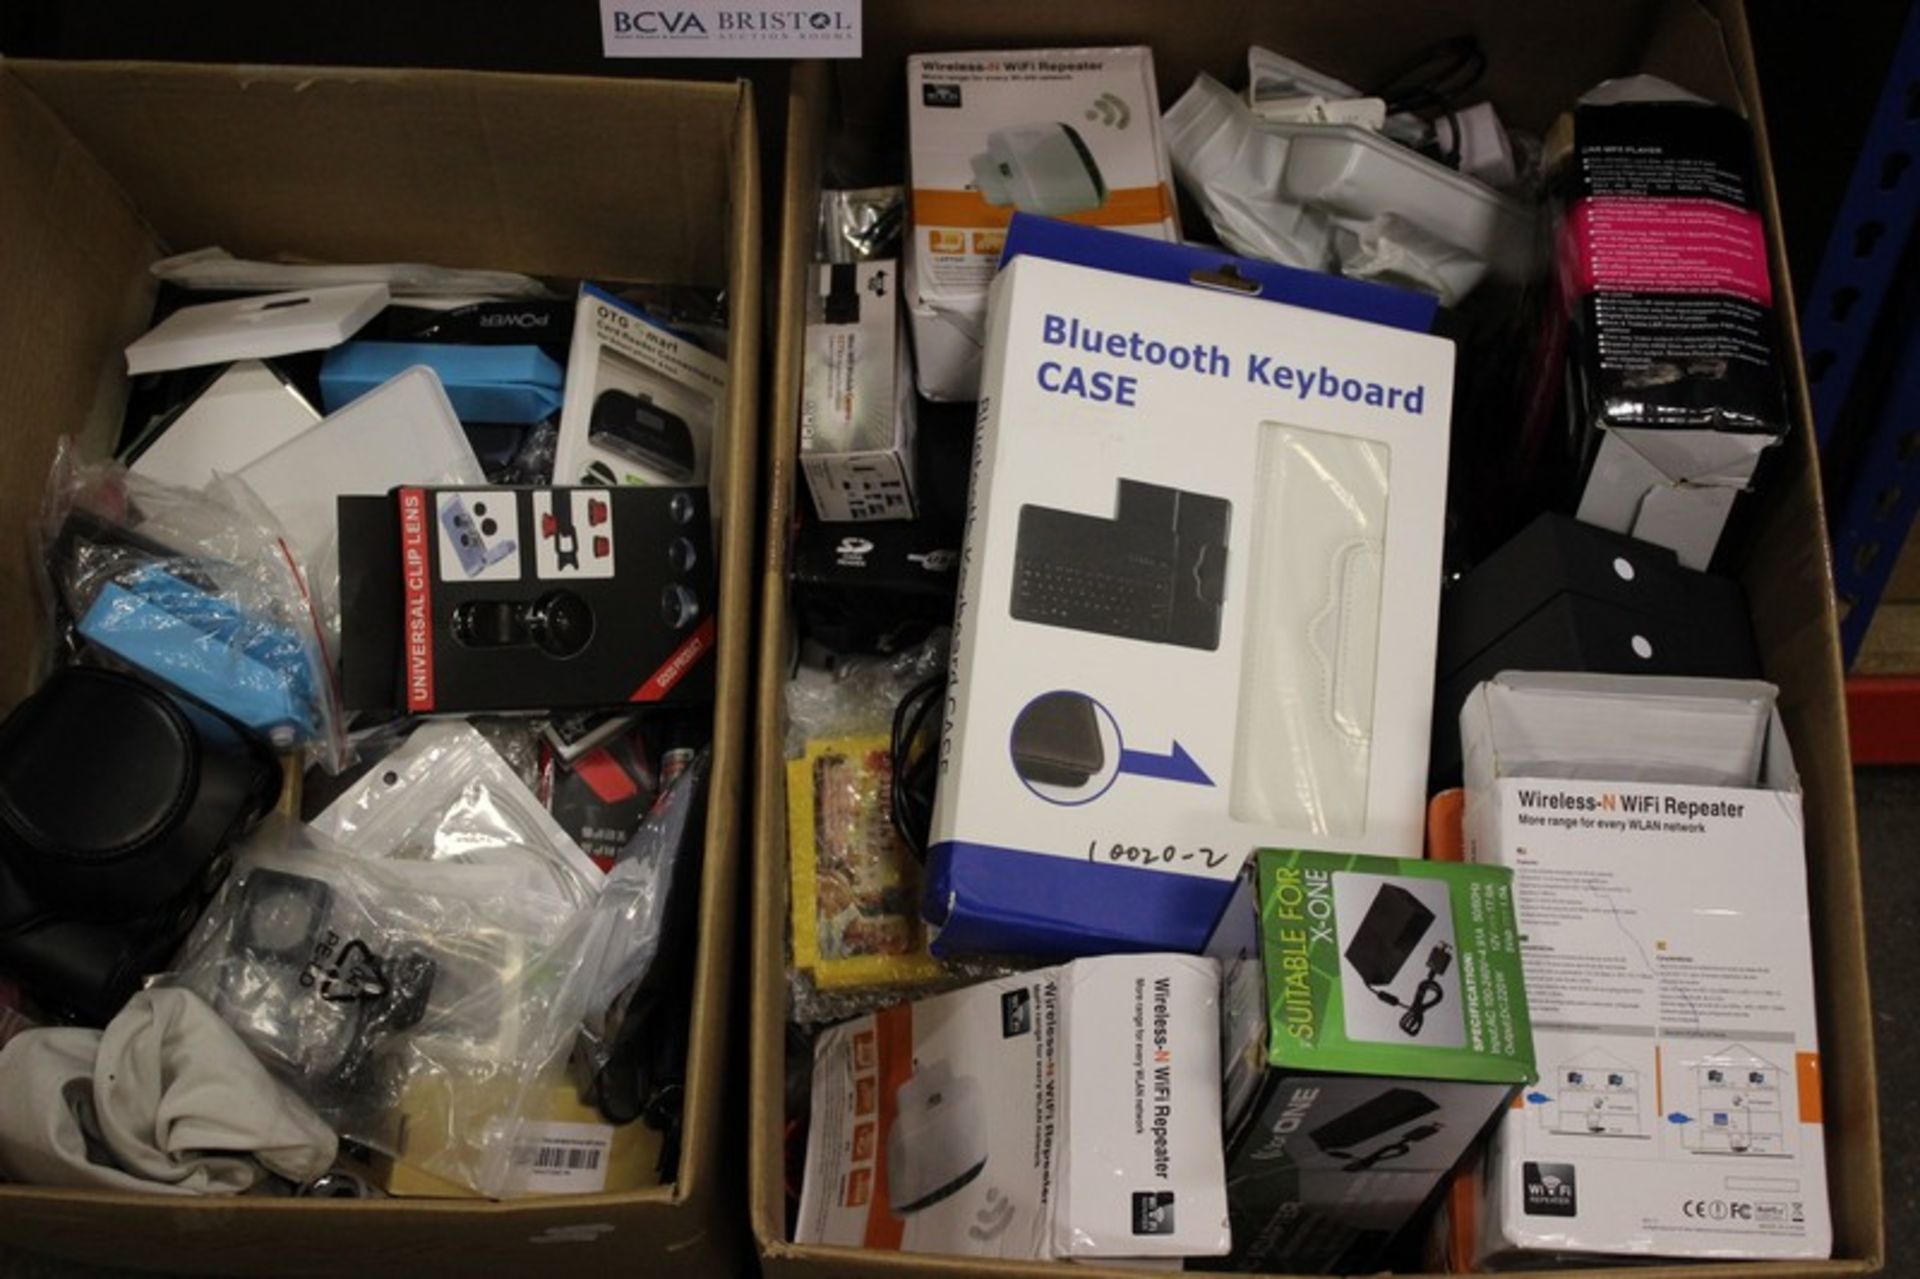 A box of phone cases and related items, a box of assorted leads, wireless Wi Fi repeaters, Airlink